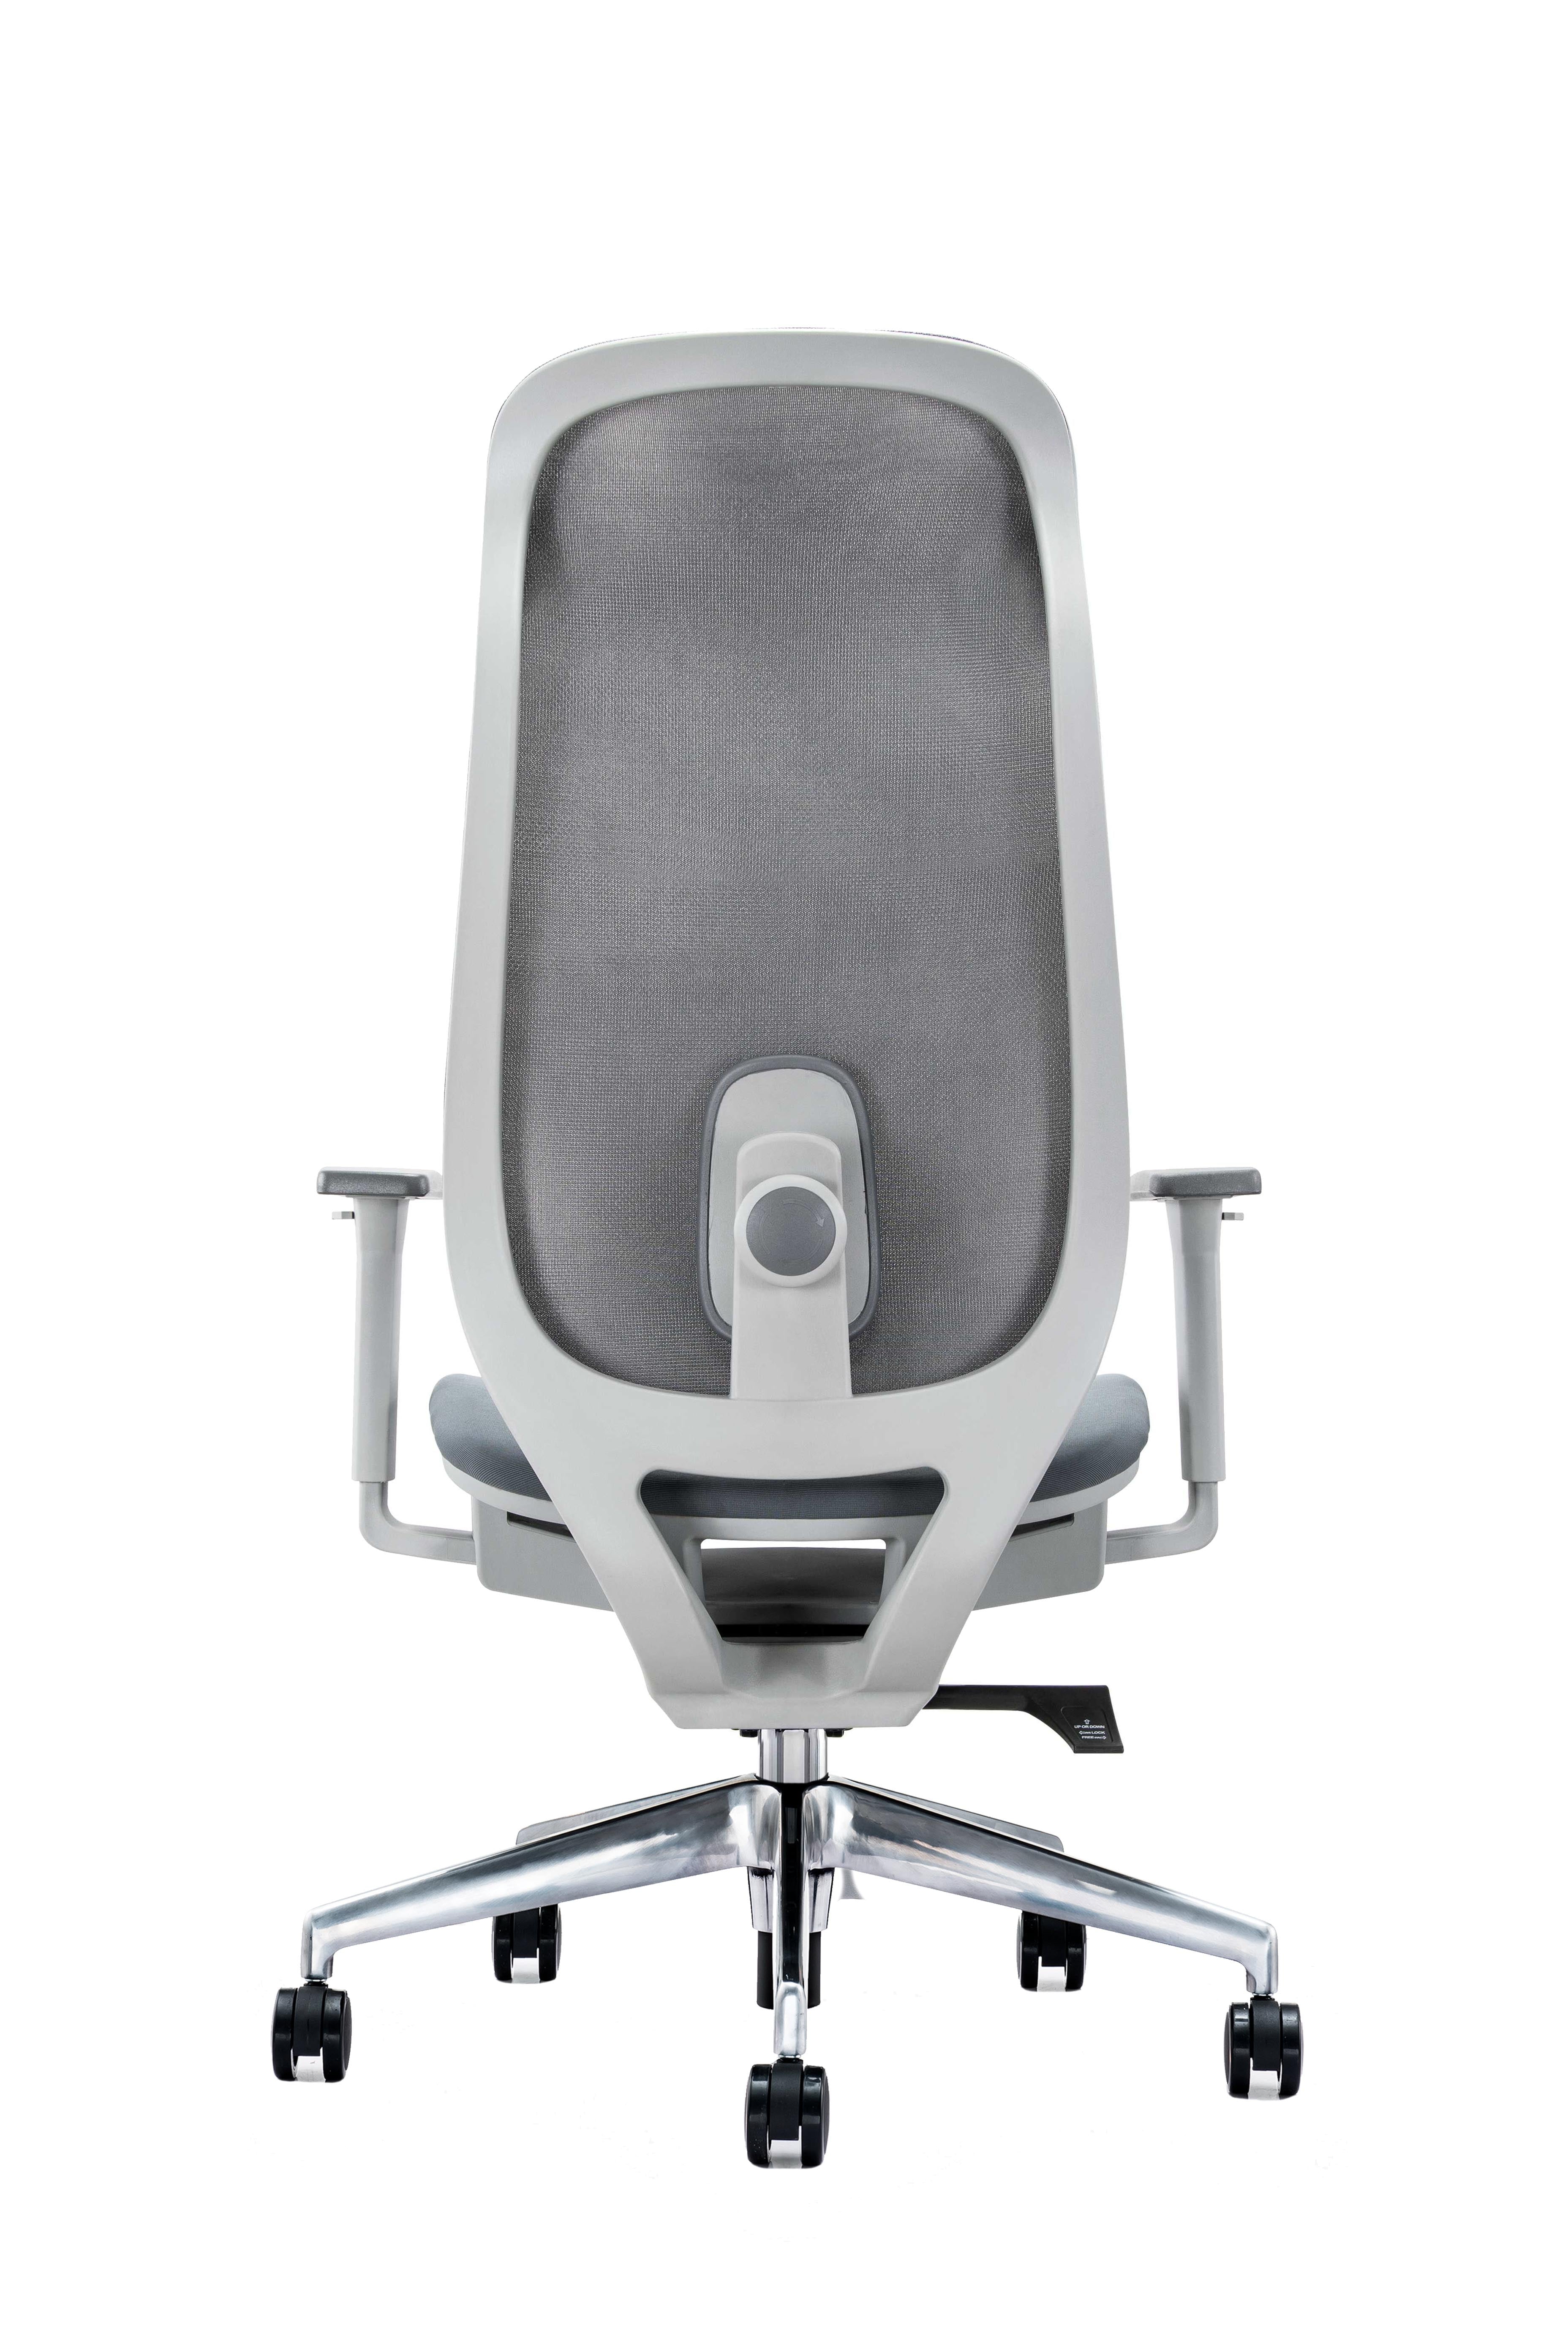 Rosa office chair With Cushion Seat, 3D Armrest And Aluminum diecast base - Grey